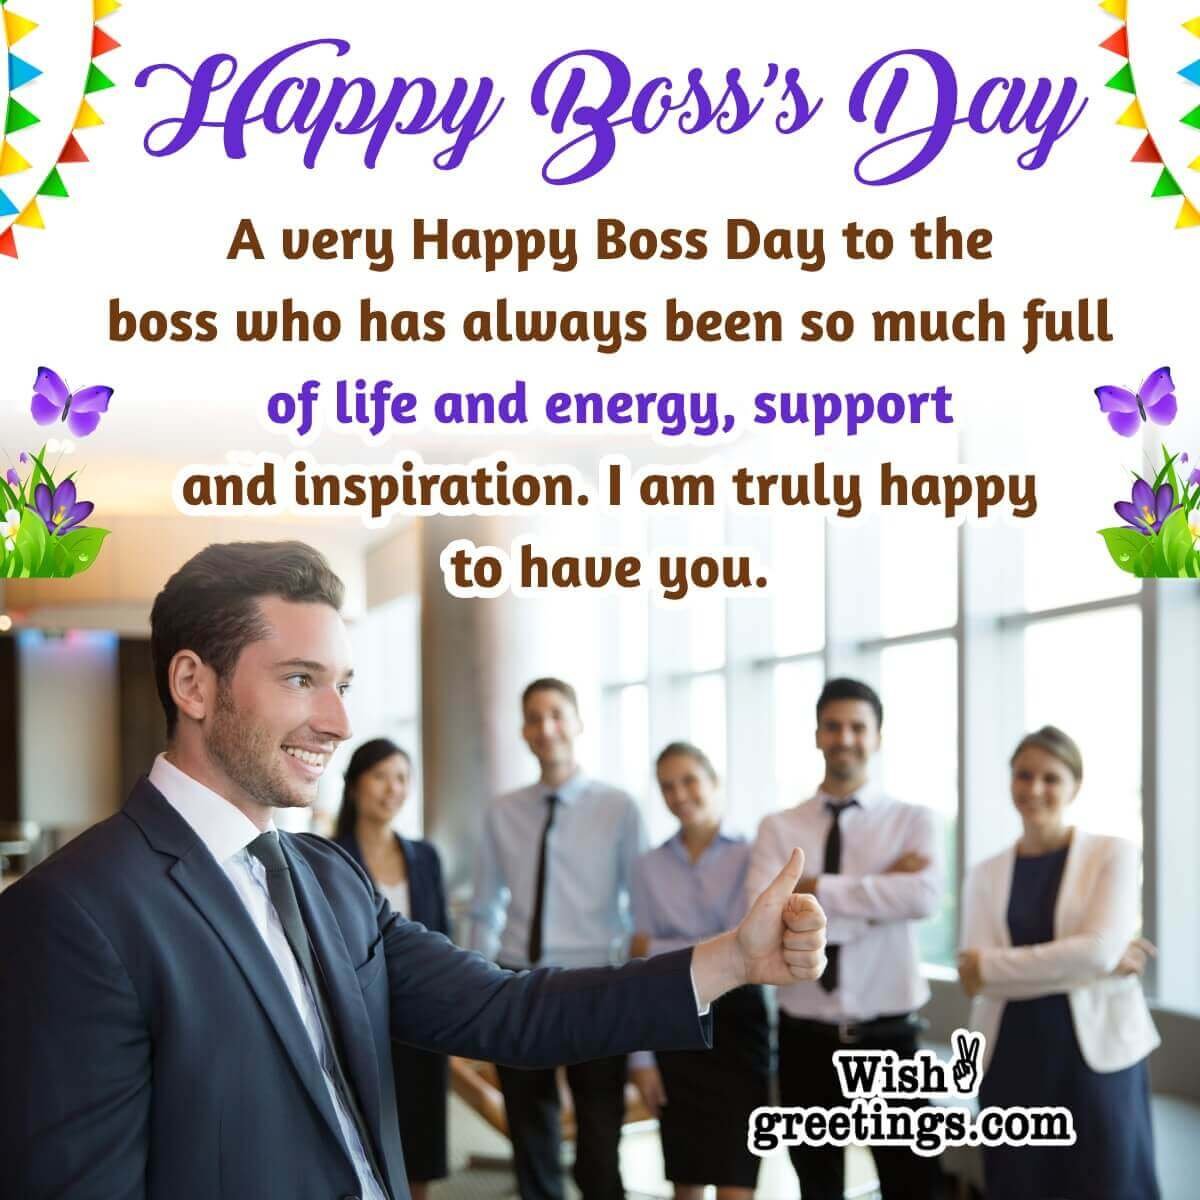 World Bosses Day Wishes Messages - Wish Greetings